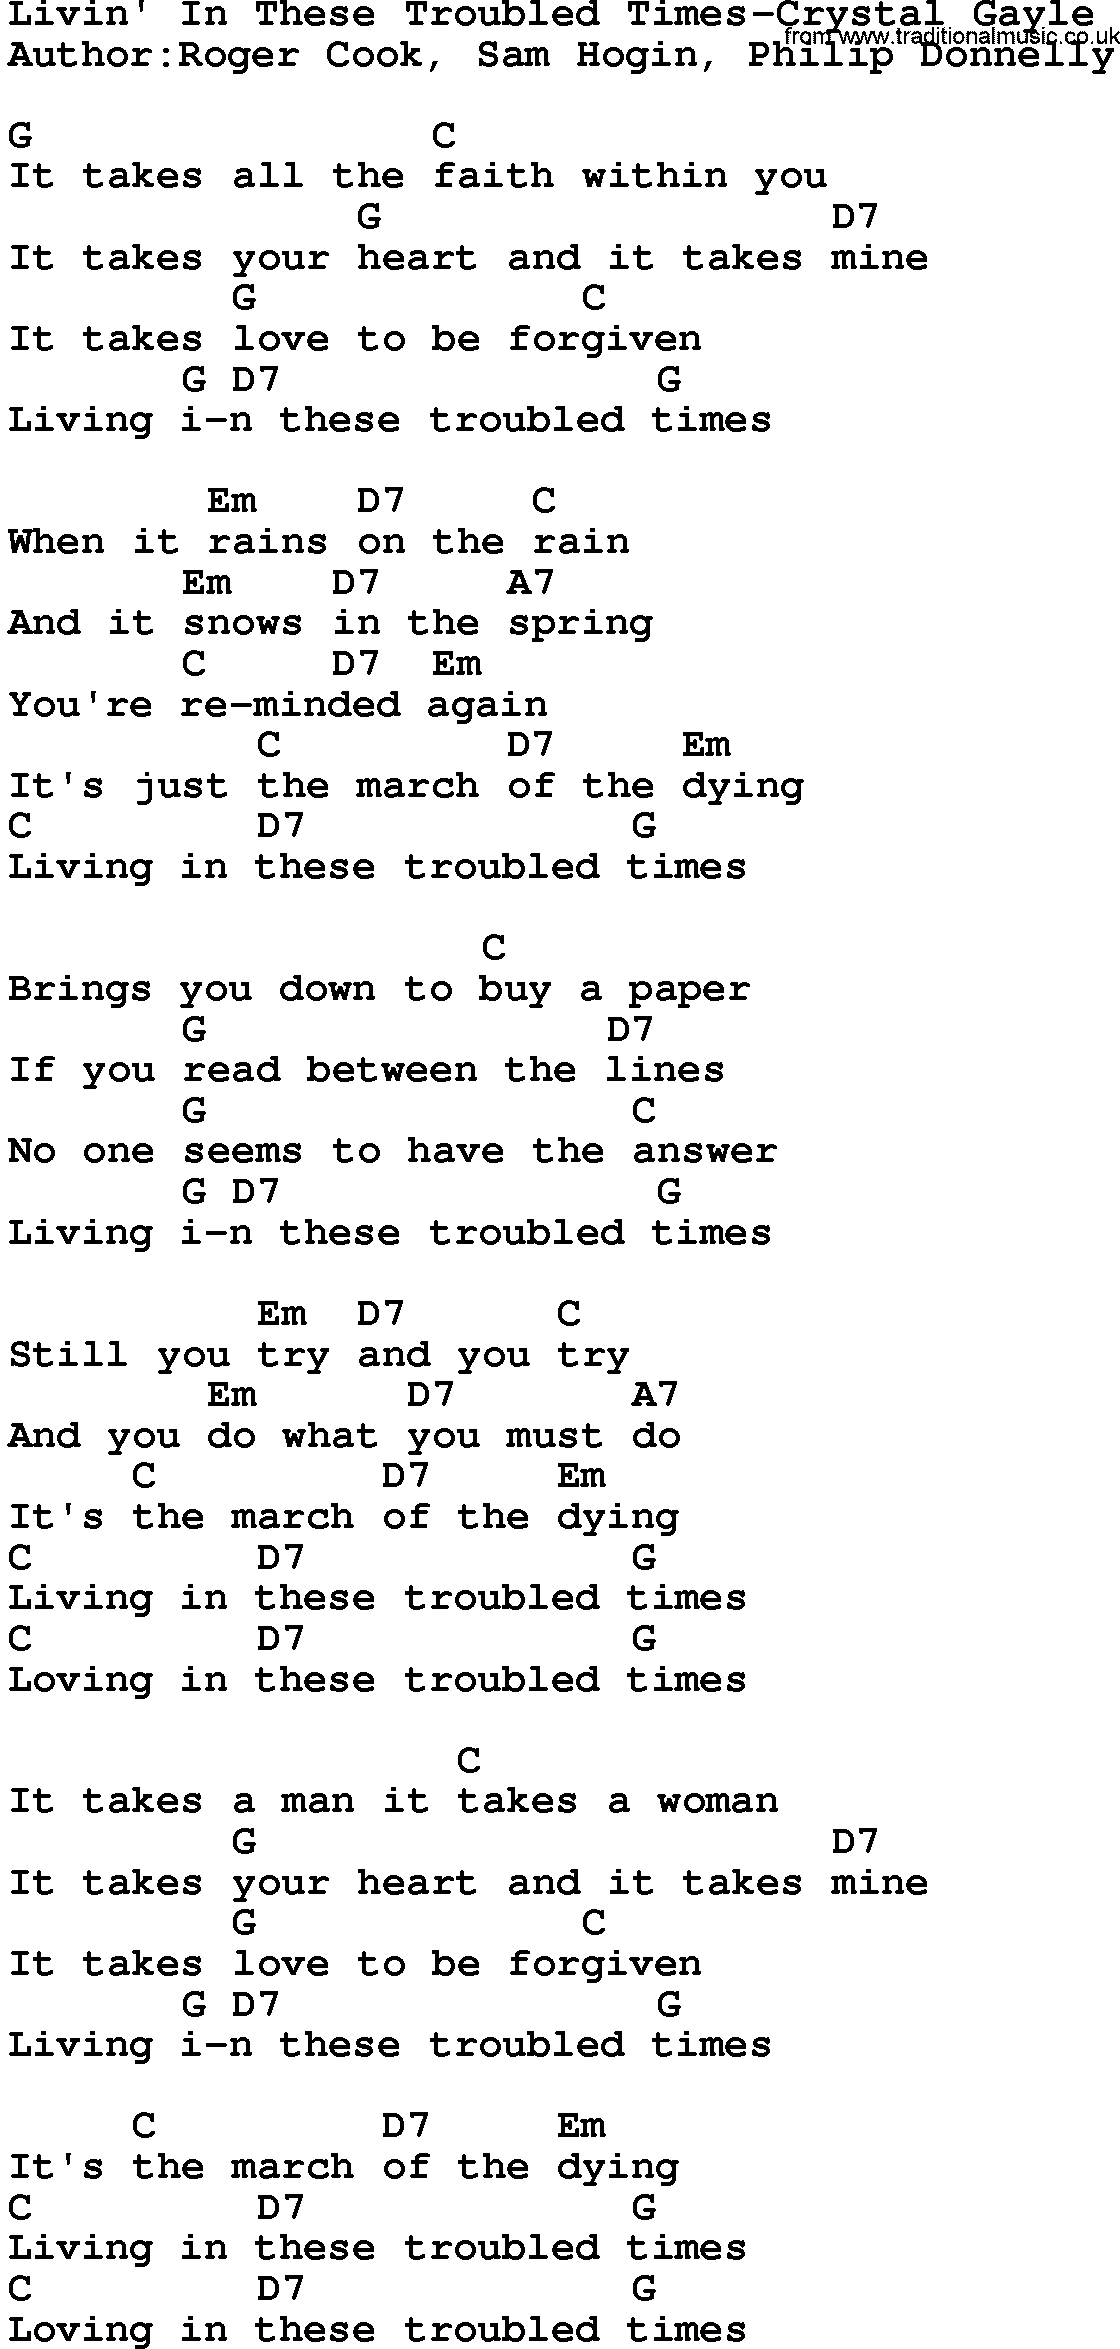 Country music song: Livin' In These Troubled Times-Crystal Gayle lyrics and chords